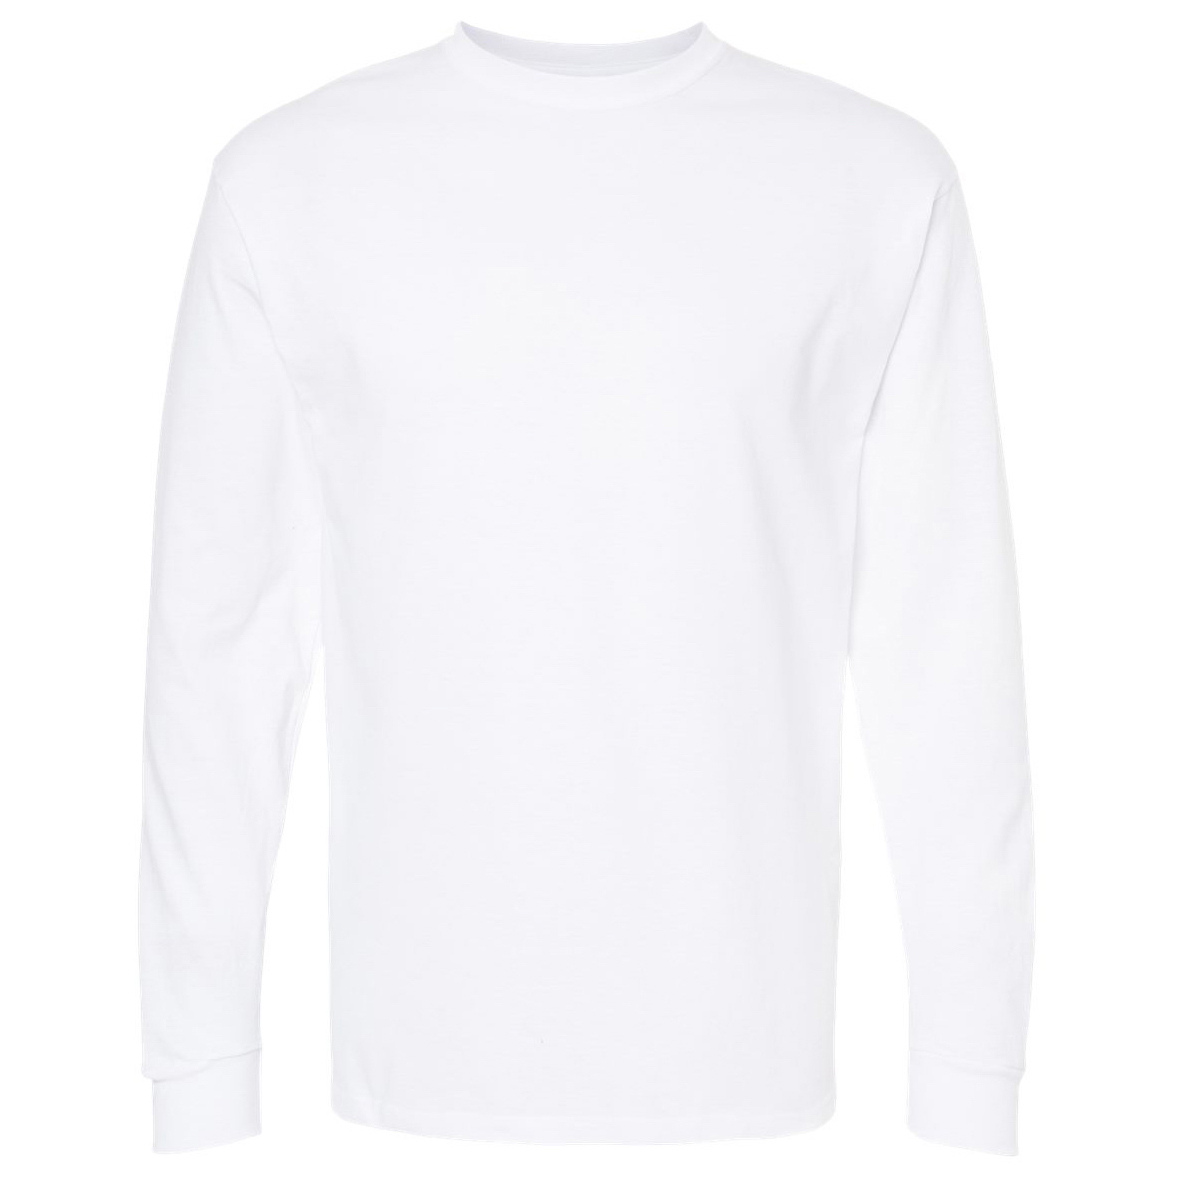 M&O 4820 Gold Soft Touch Long Sleeve T-Shirt - White | Full Source